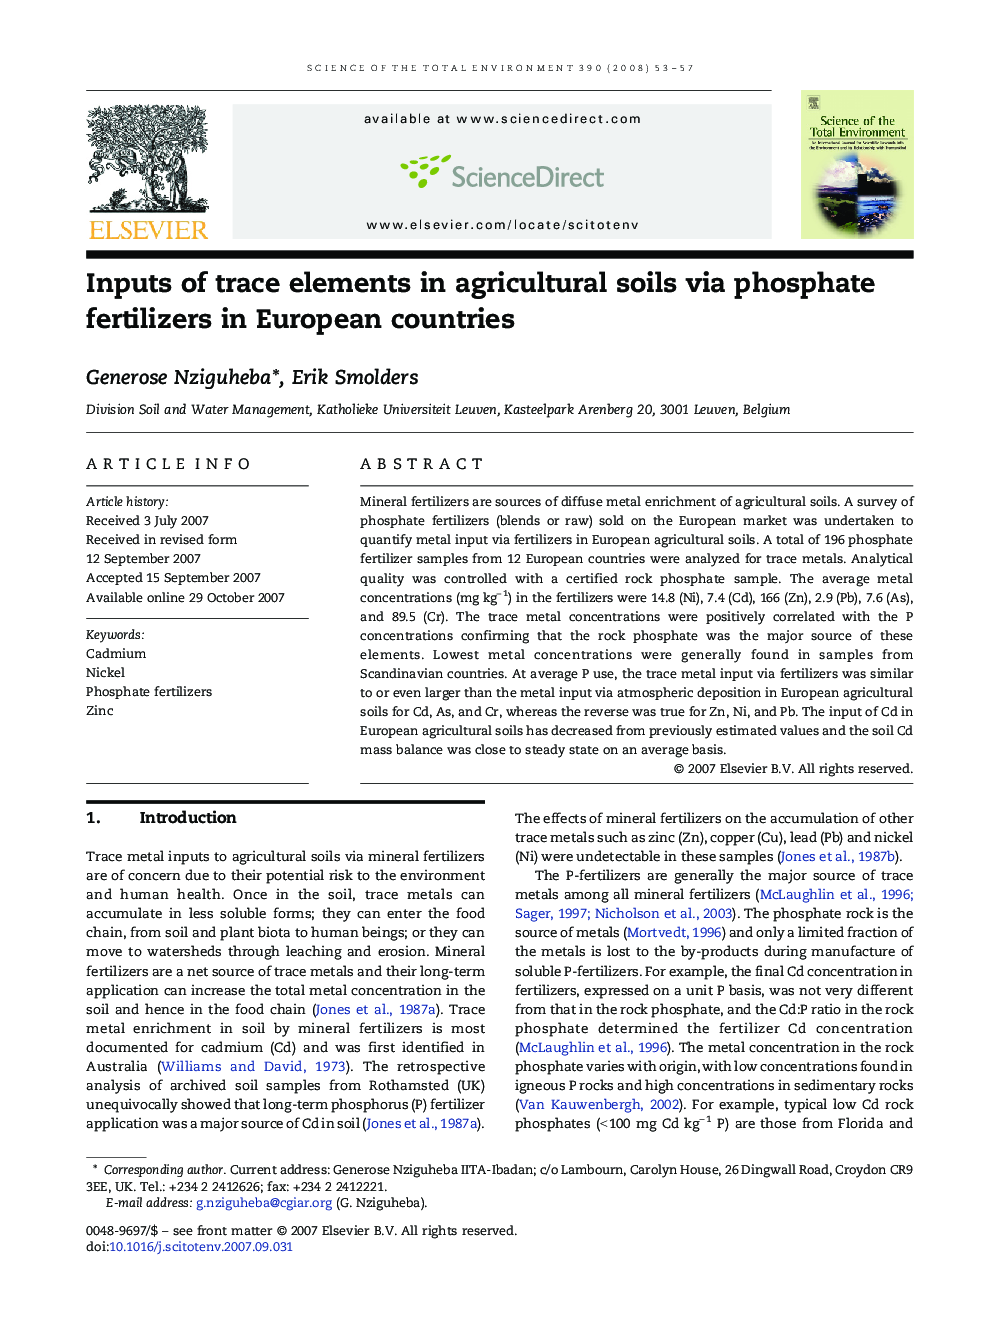 Inputs of trace elements in agricultural soils via phosphate fertilizers in European countries